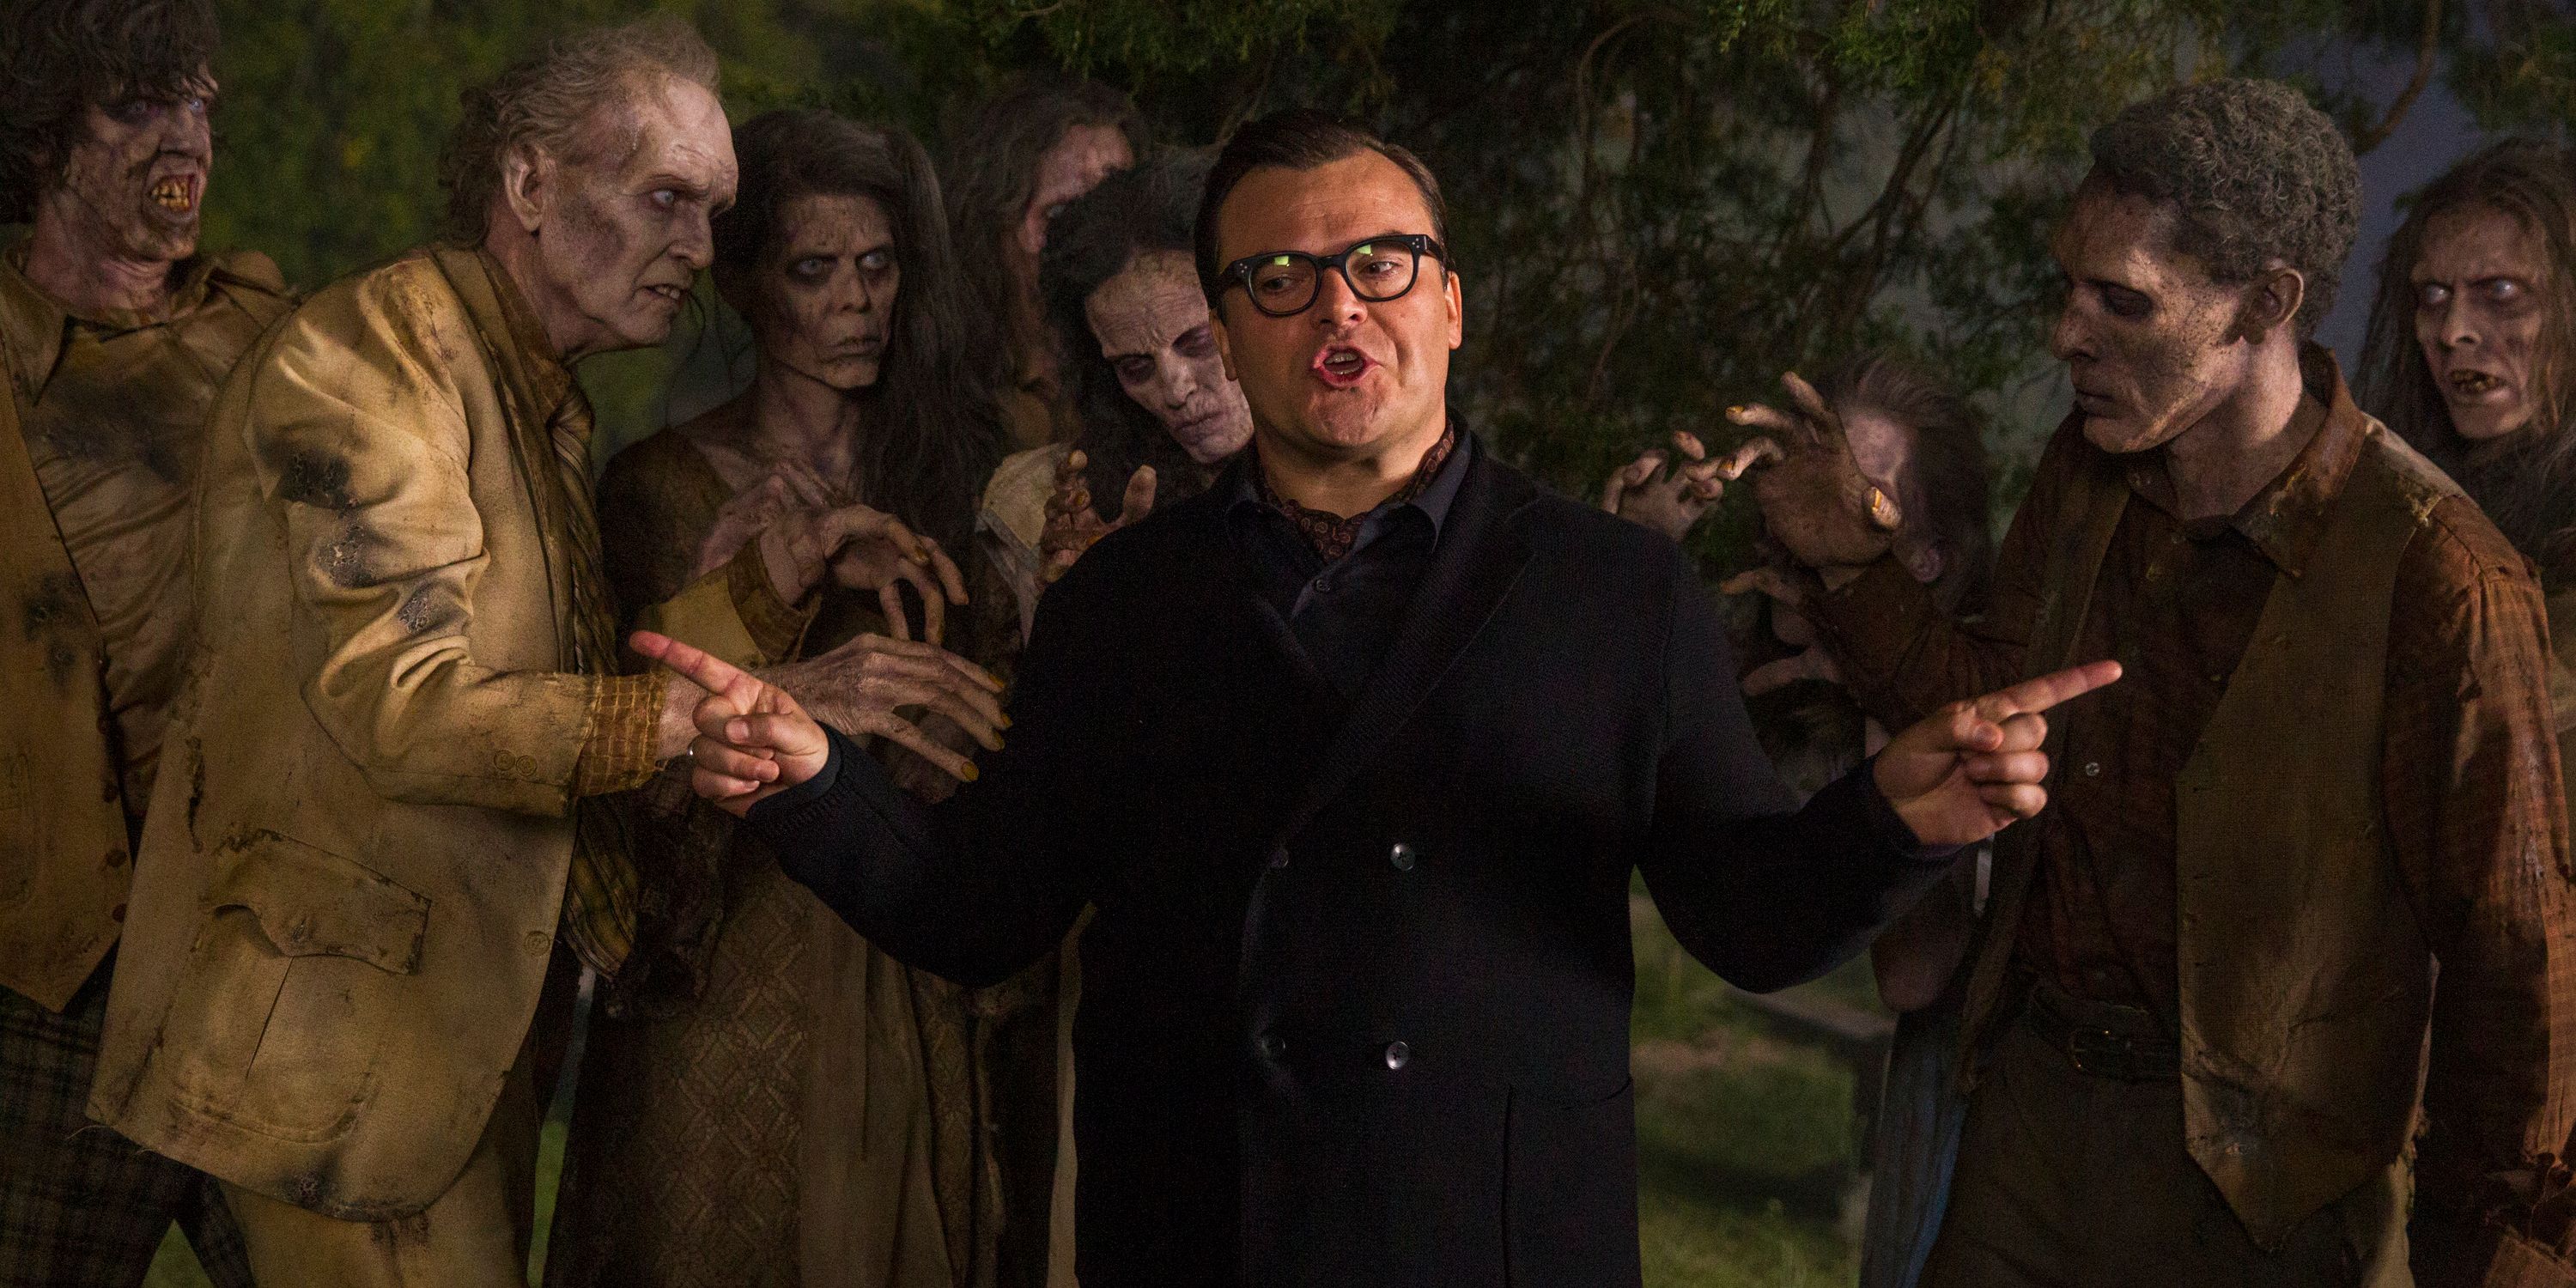 Jack Black and friends in Goosebumps